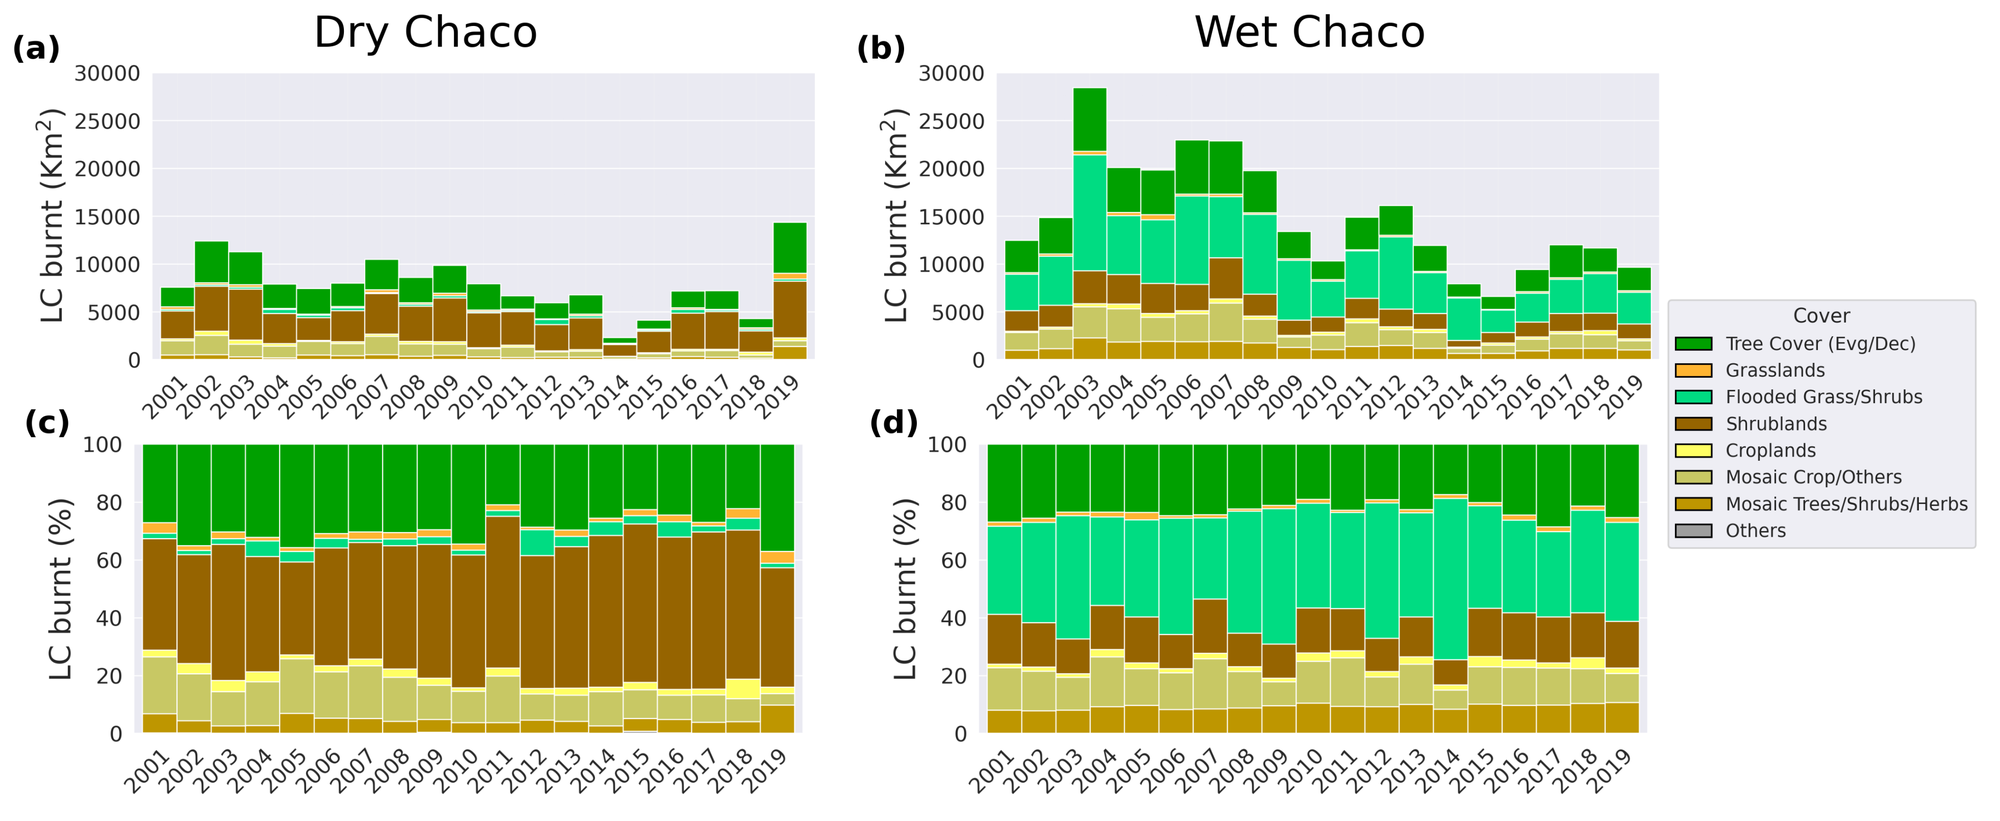 Bar plots showing total and proportional annual burnt area divided into land cover classes for the Dry (a, c) and Wet (b, d) Chaco between 2001 and 2019. Area is expressed in km2. All data retrieved from the FireCCI51 product.